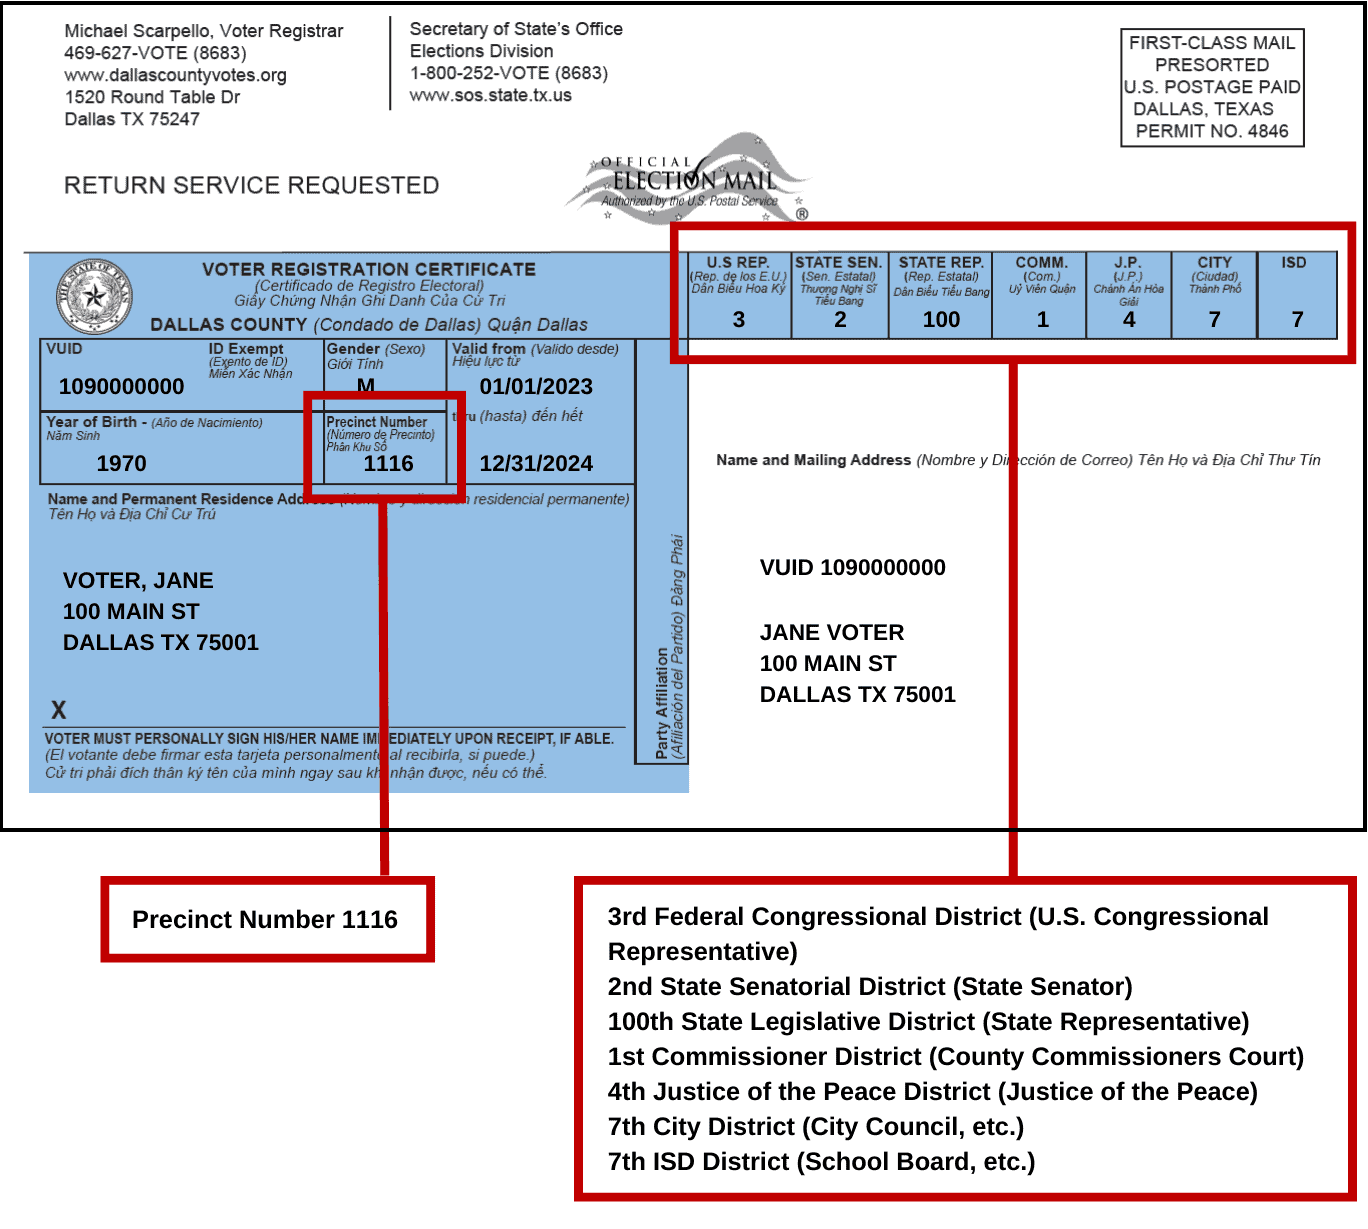 A sample voter registration certificate with explanations of what the voter can vote on. The text before this image includes this information in a list.